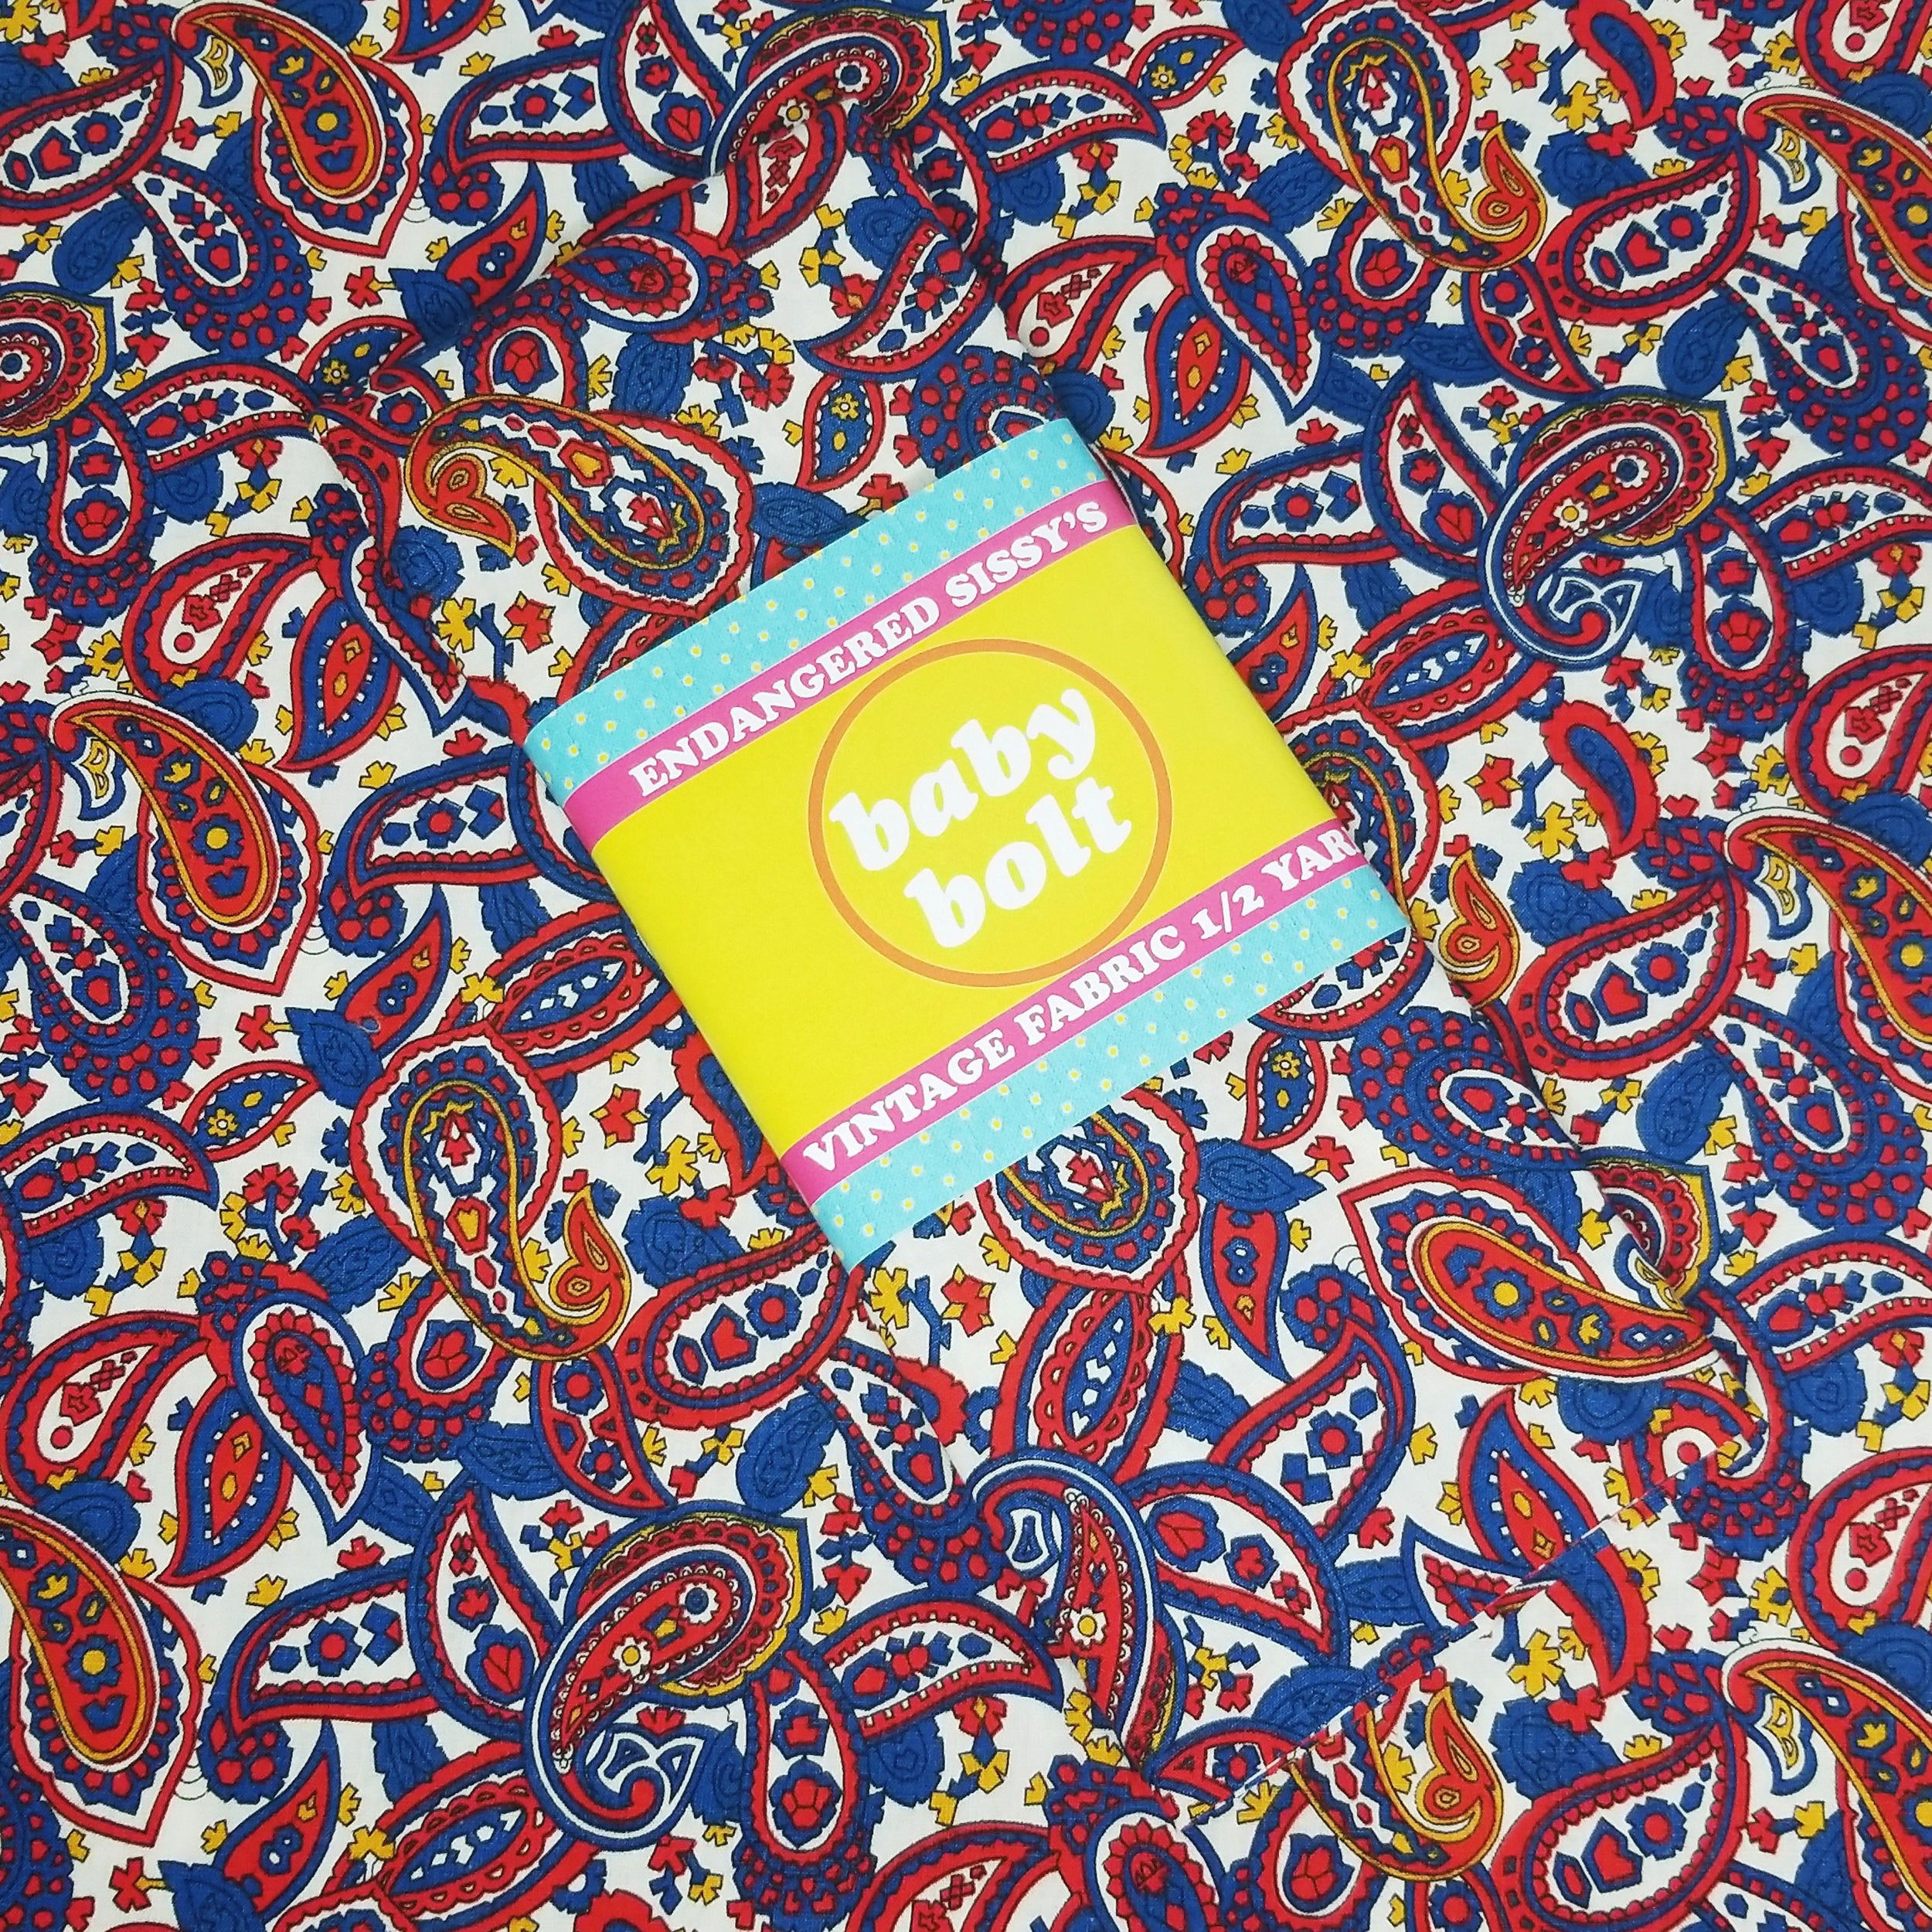 VINTAGE FABRIC BABY BOLT HALF-YARD -  SIXTIES' CLASSIC PAISLEY IN RED, WHITE, BLUE & YELLOW